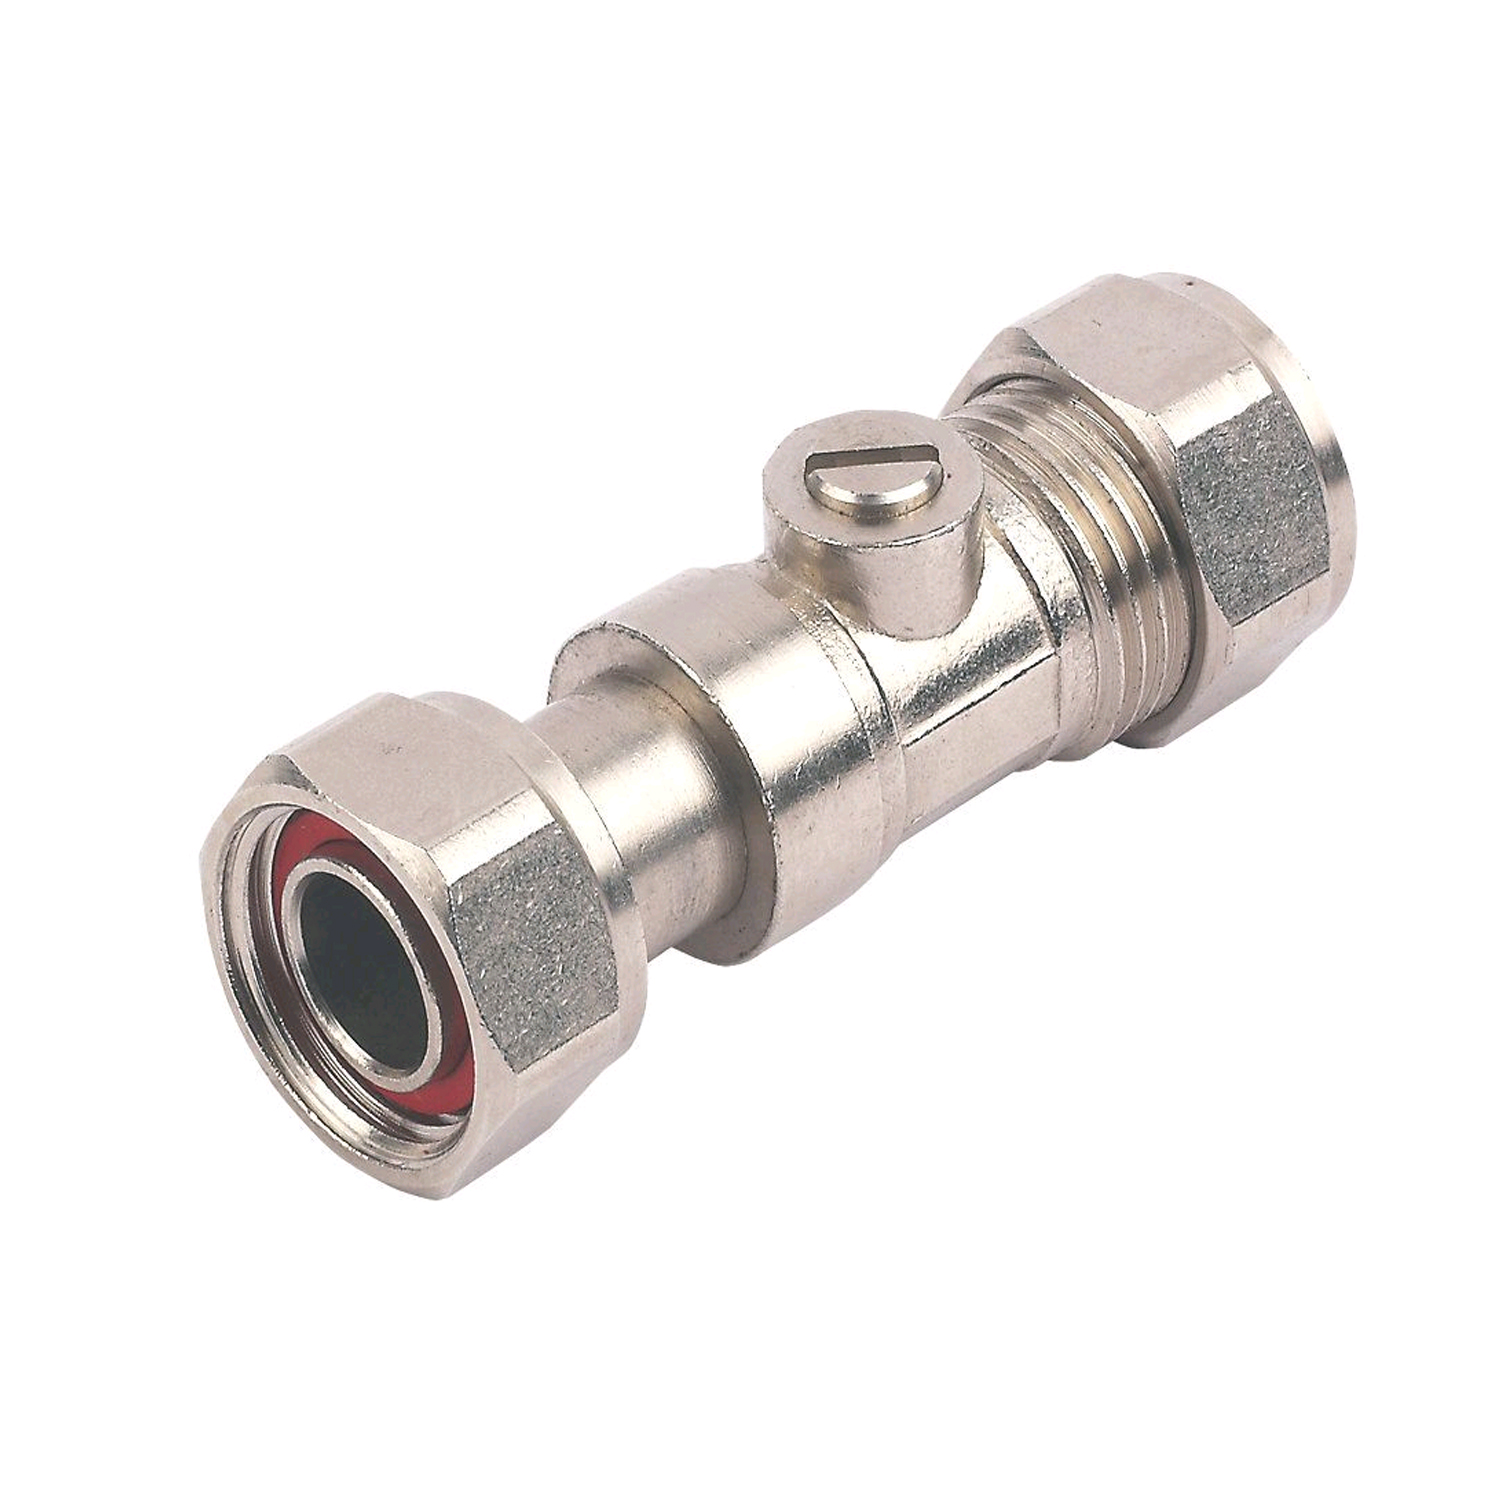 15mm x 1/2in Straight Service Valve - Chrome Plated